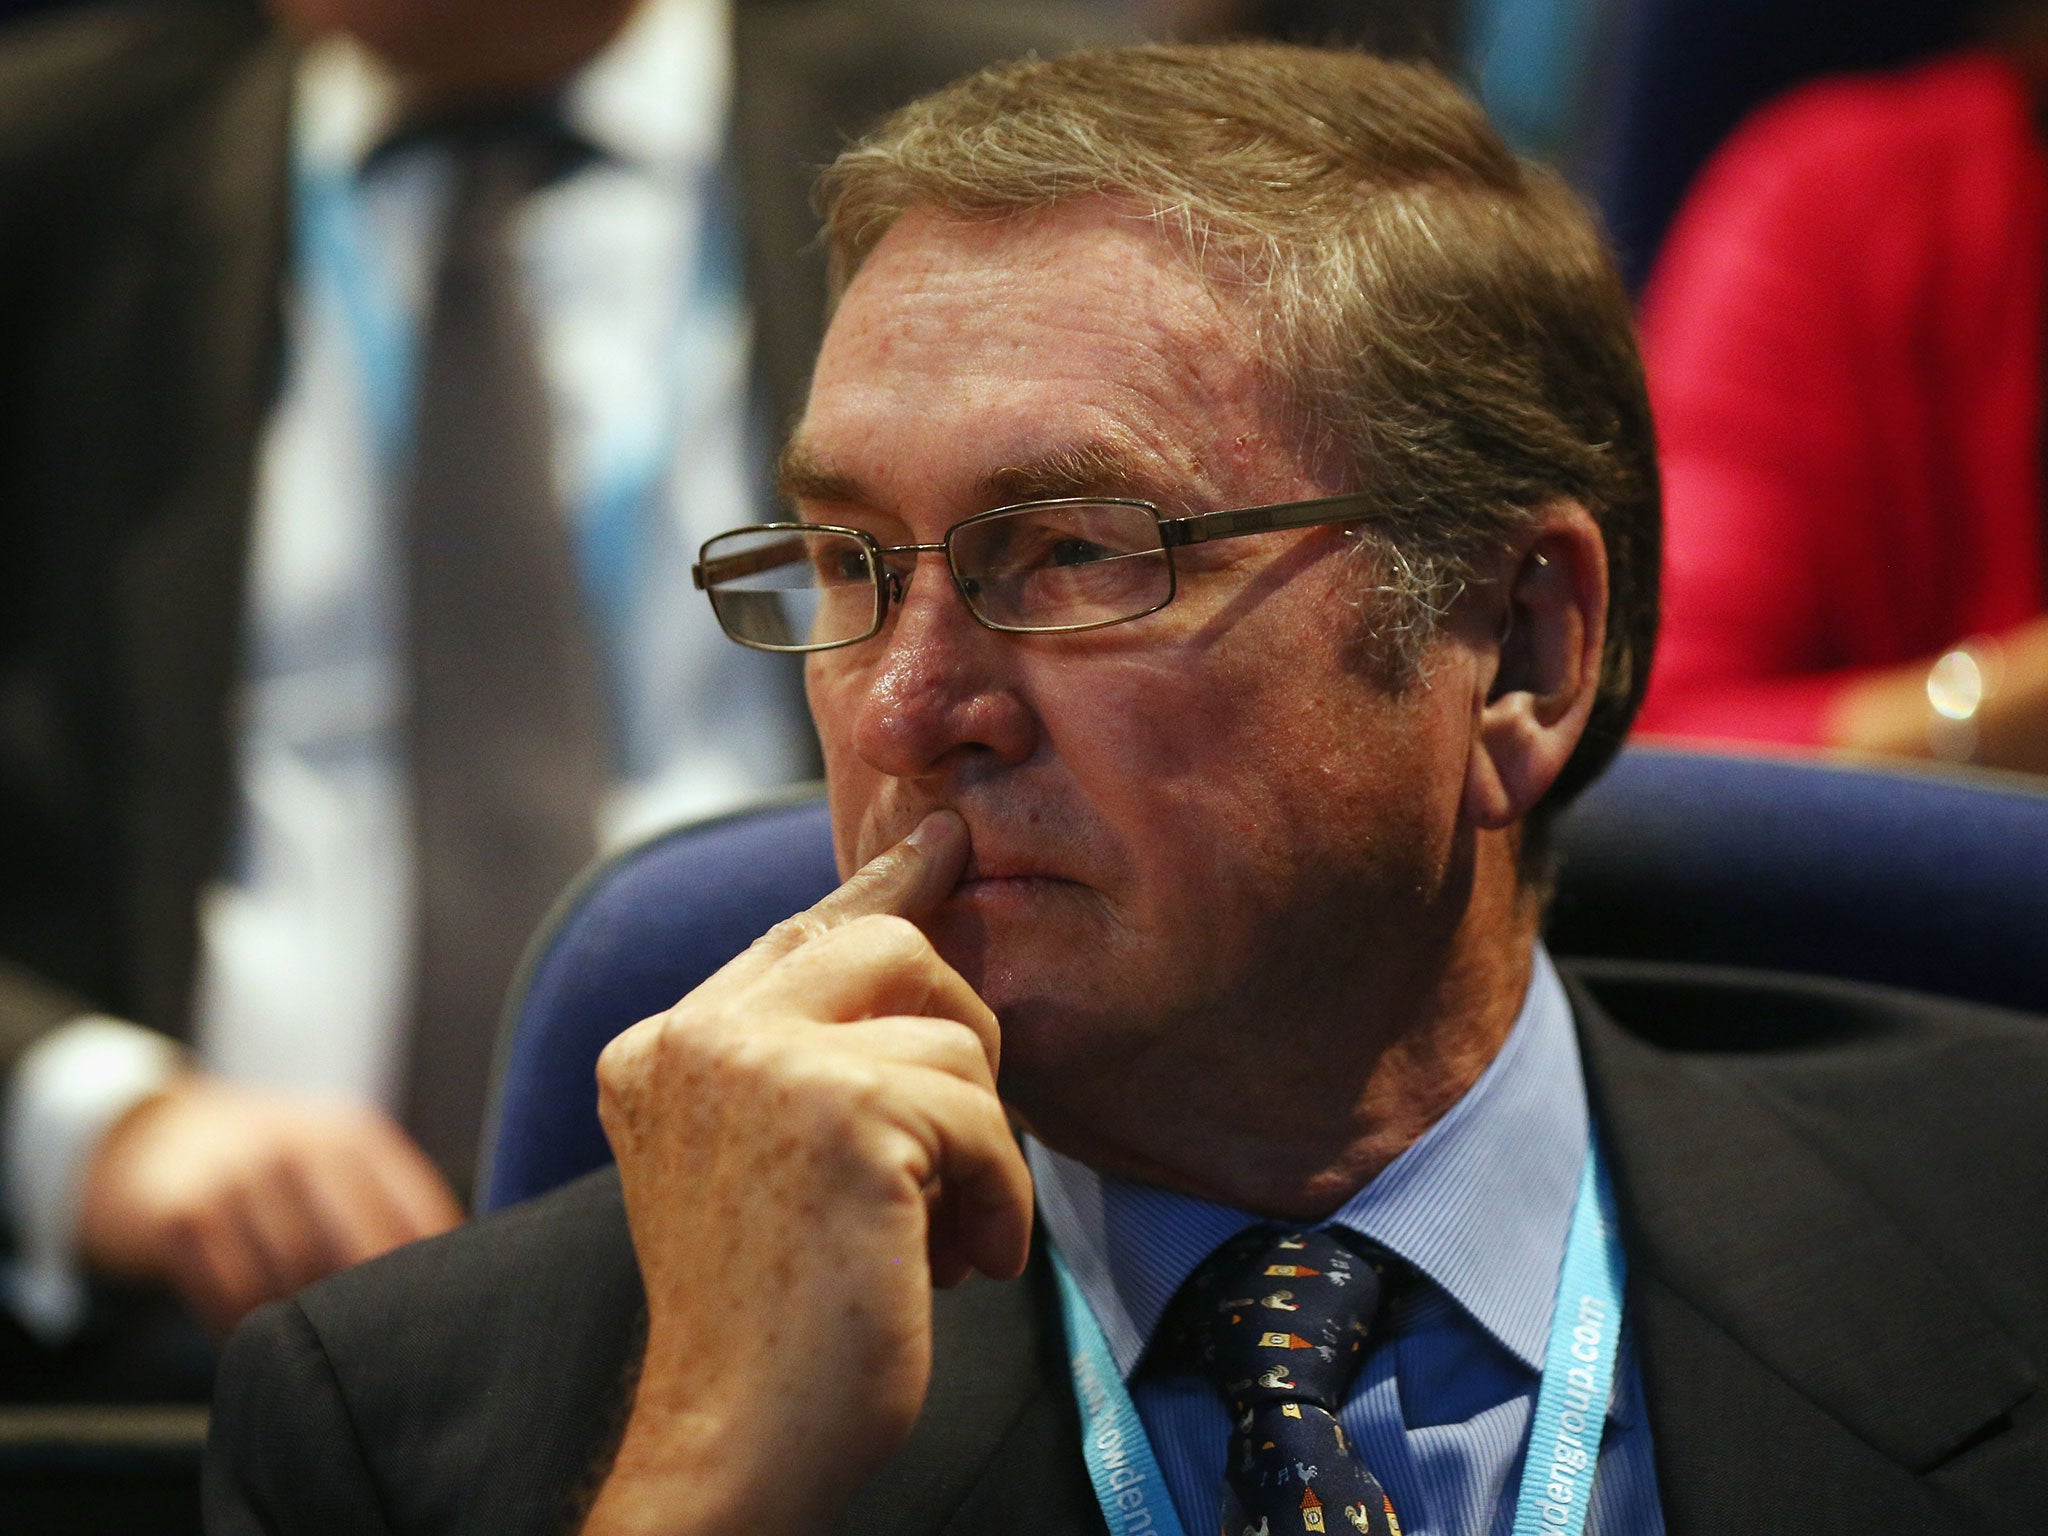 The highly anticipated analysis of Scottish constituencies by Lord Ashcroft, the former Conservative deputy chairman, will back up recent polls which point to a major rewrite of Scotland’s political map